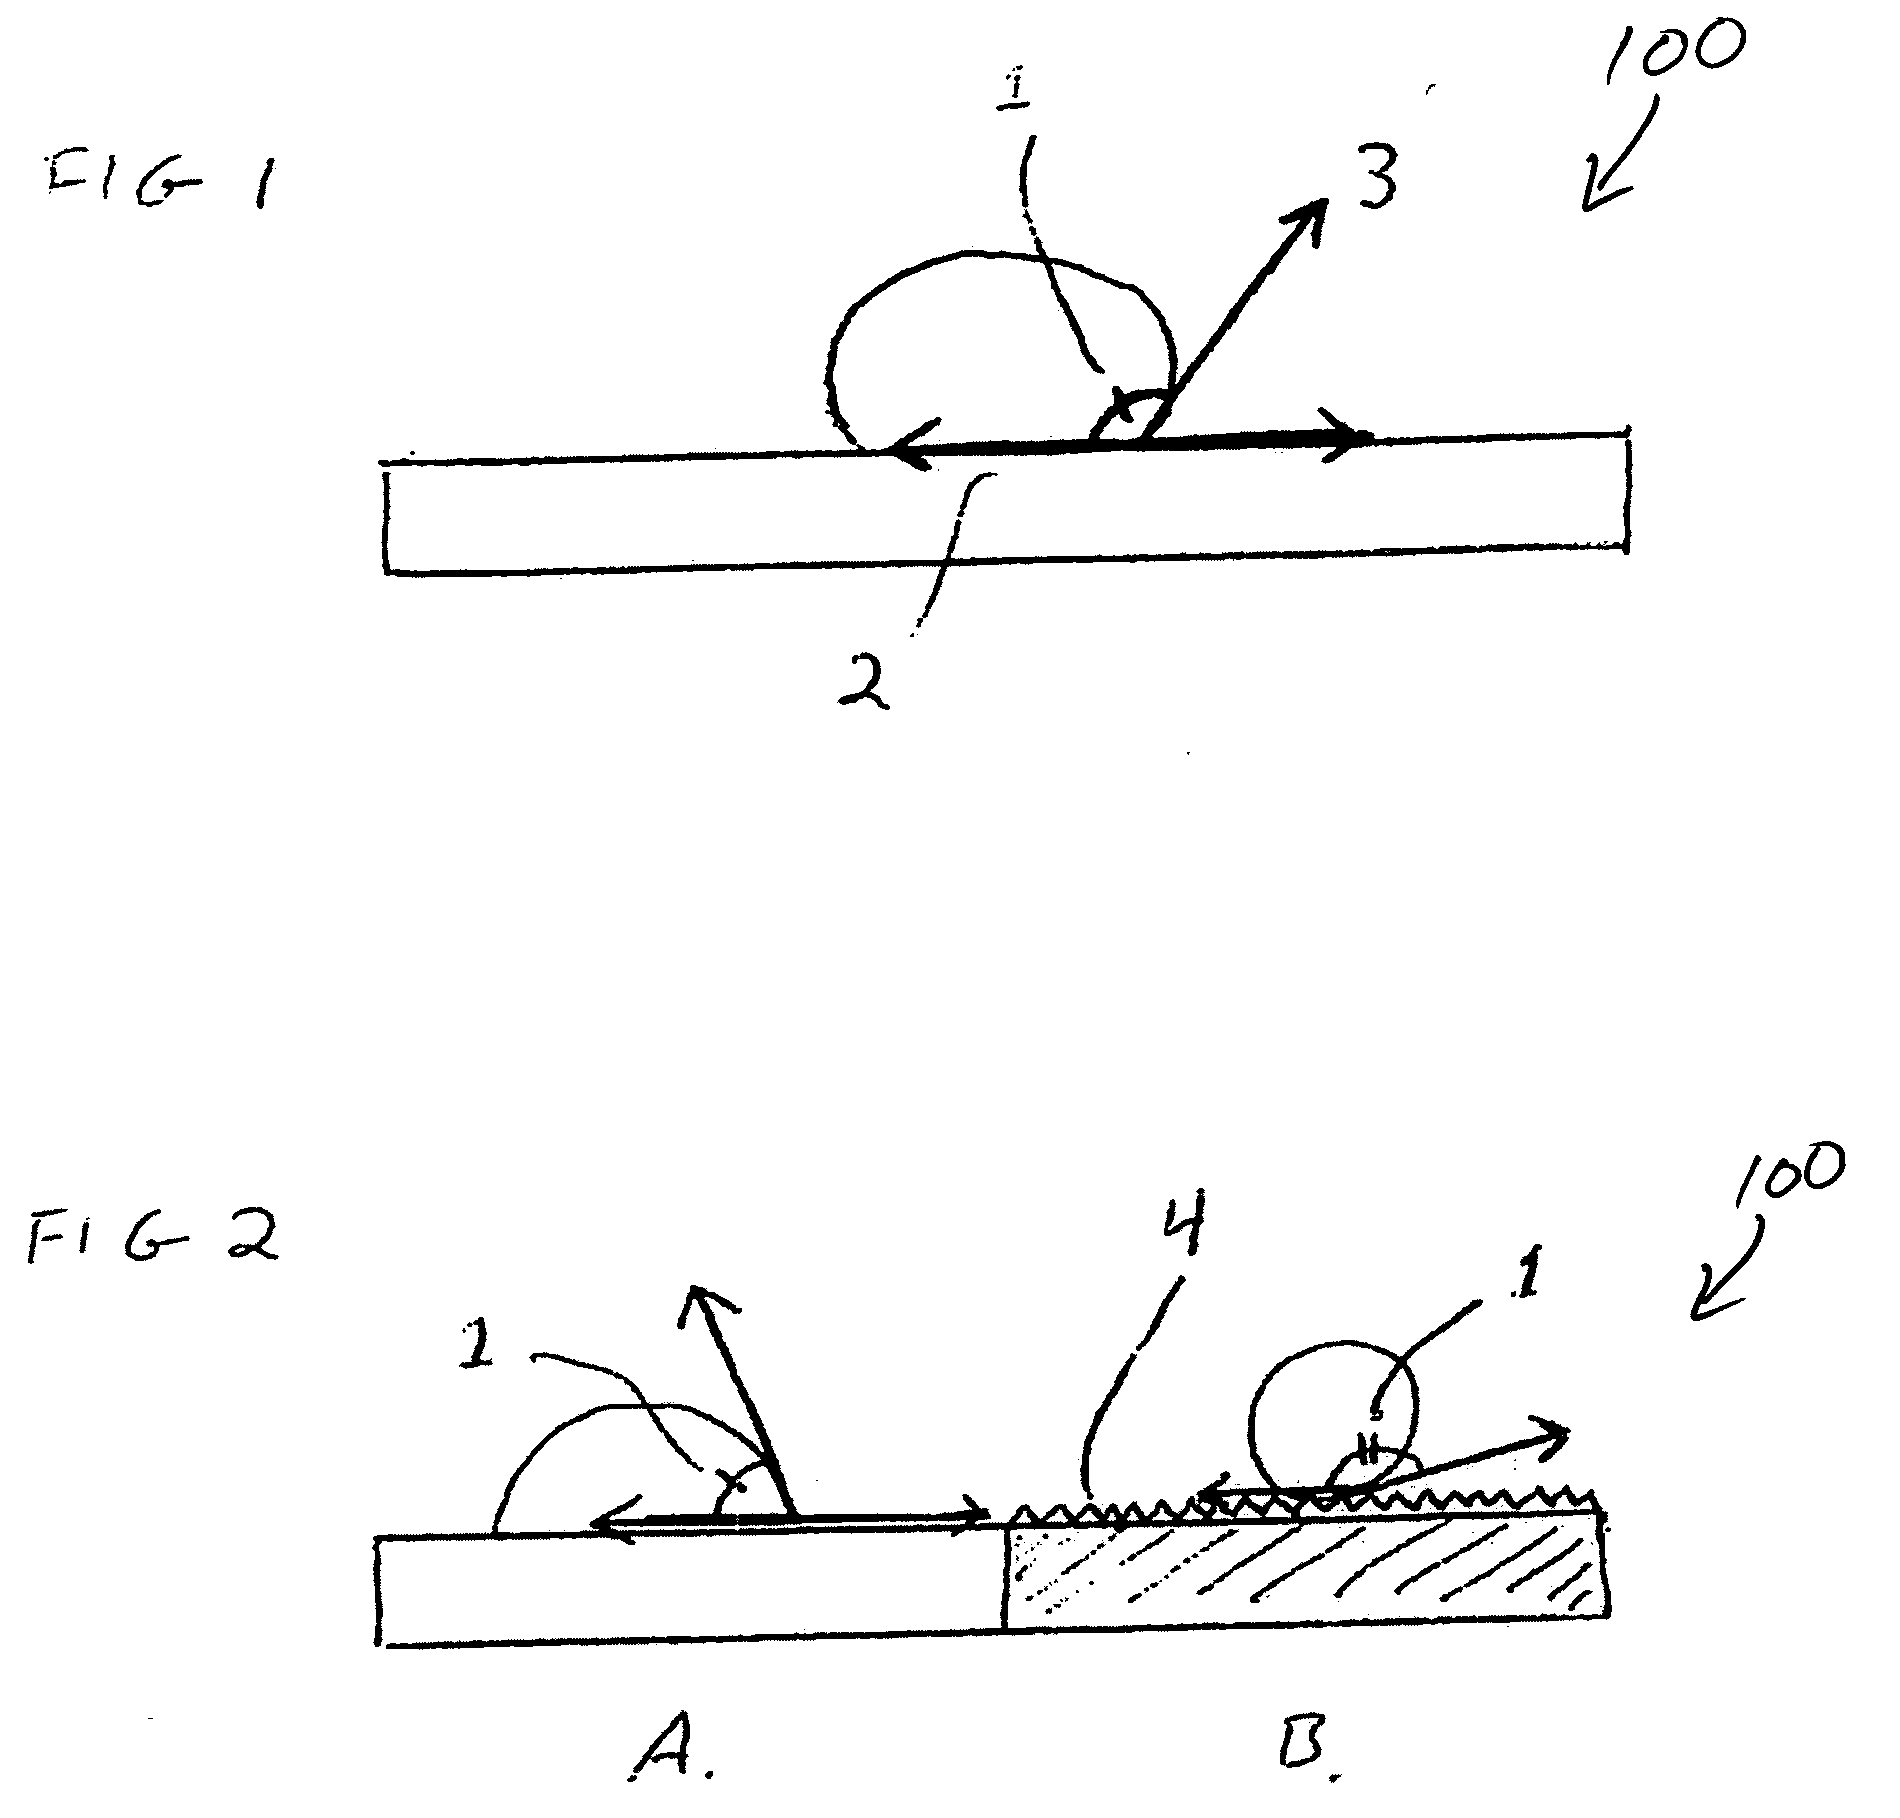 Nano materials application in durable medical equipment and method of using same